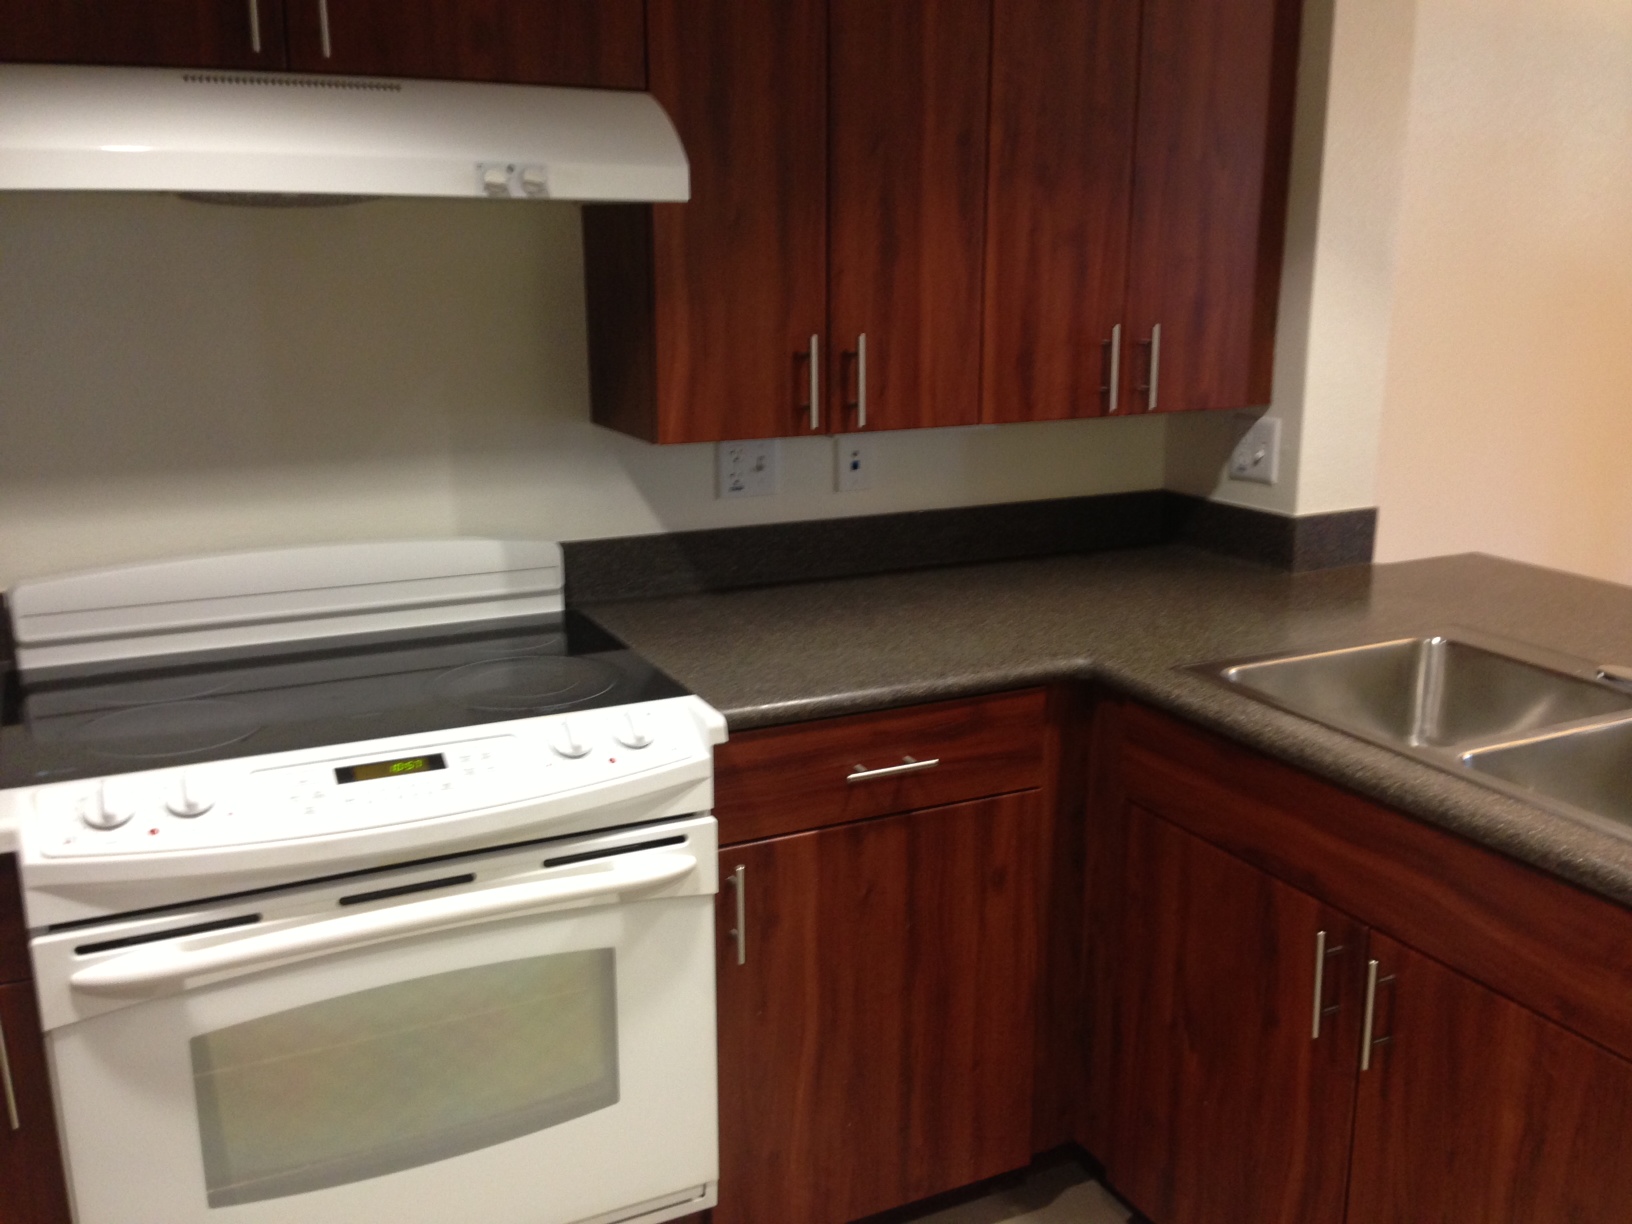 Interior view of a kitchen at Rio Vista Apartments showing a stove, kitchen sink and cabinets